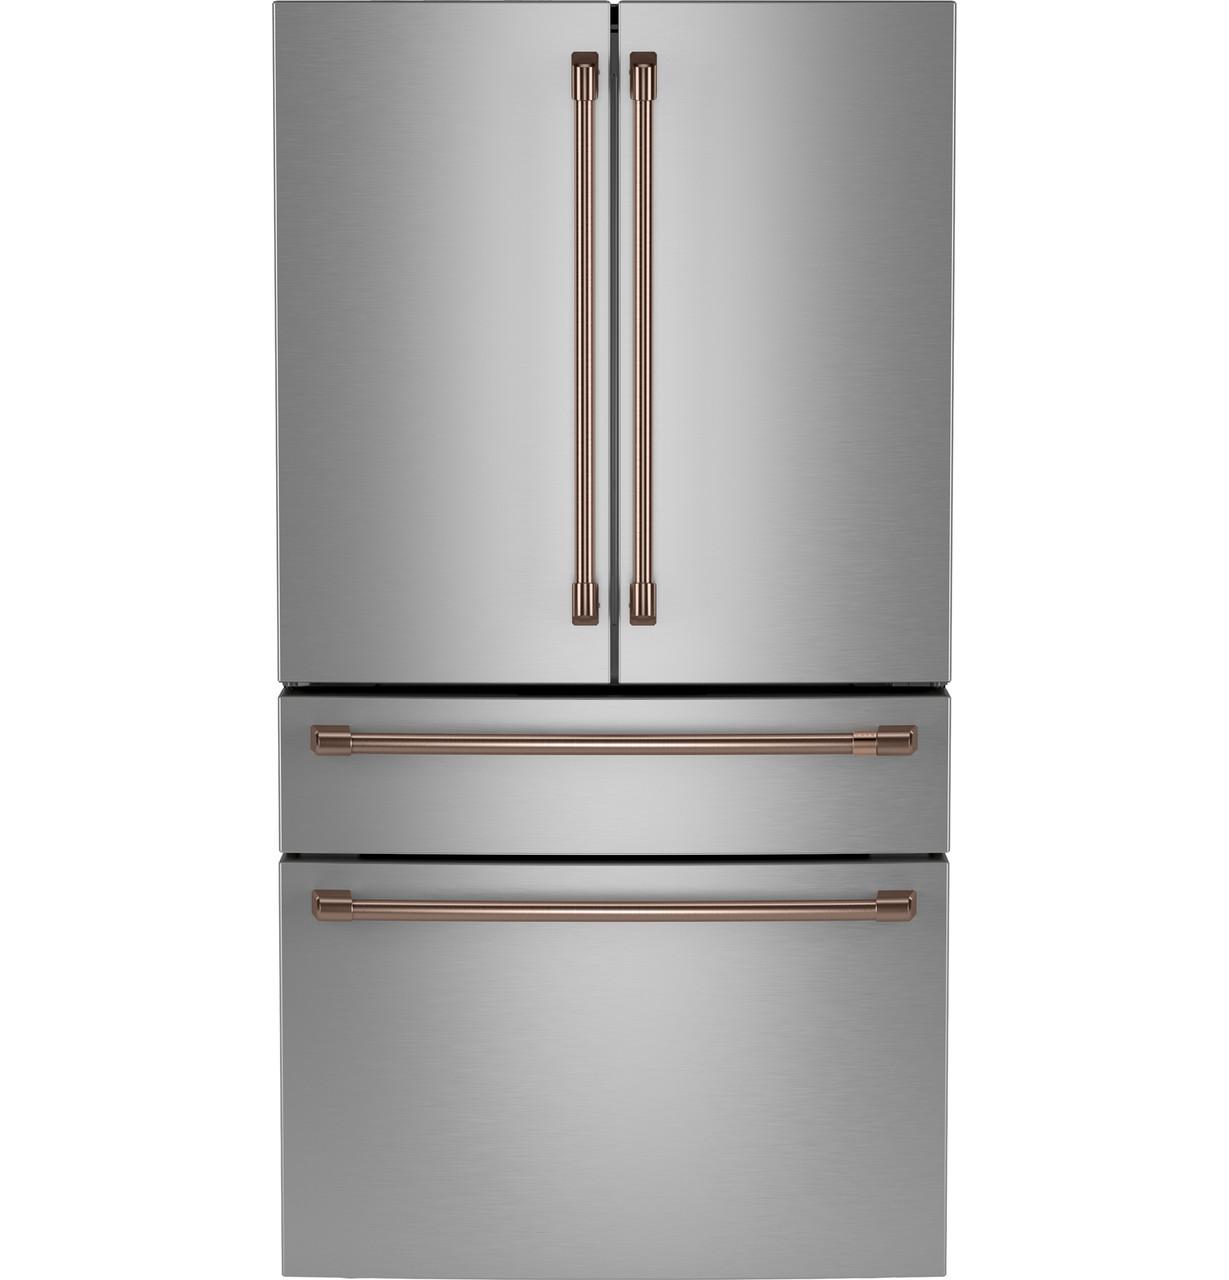 Cafe Caf(eback)™ ENERGY STAR® 28.7 Cu. Ft. Smart 4-Door French-Door Refrigerator With Dual-Dispense AutoFill Pitcher